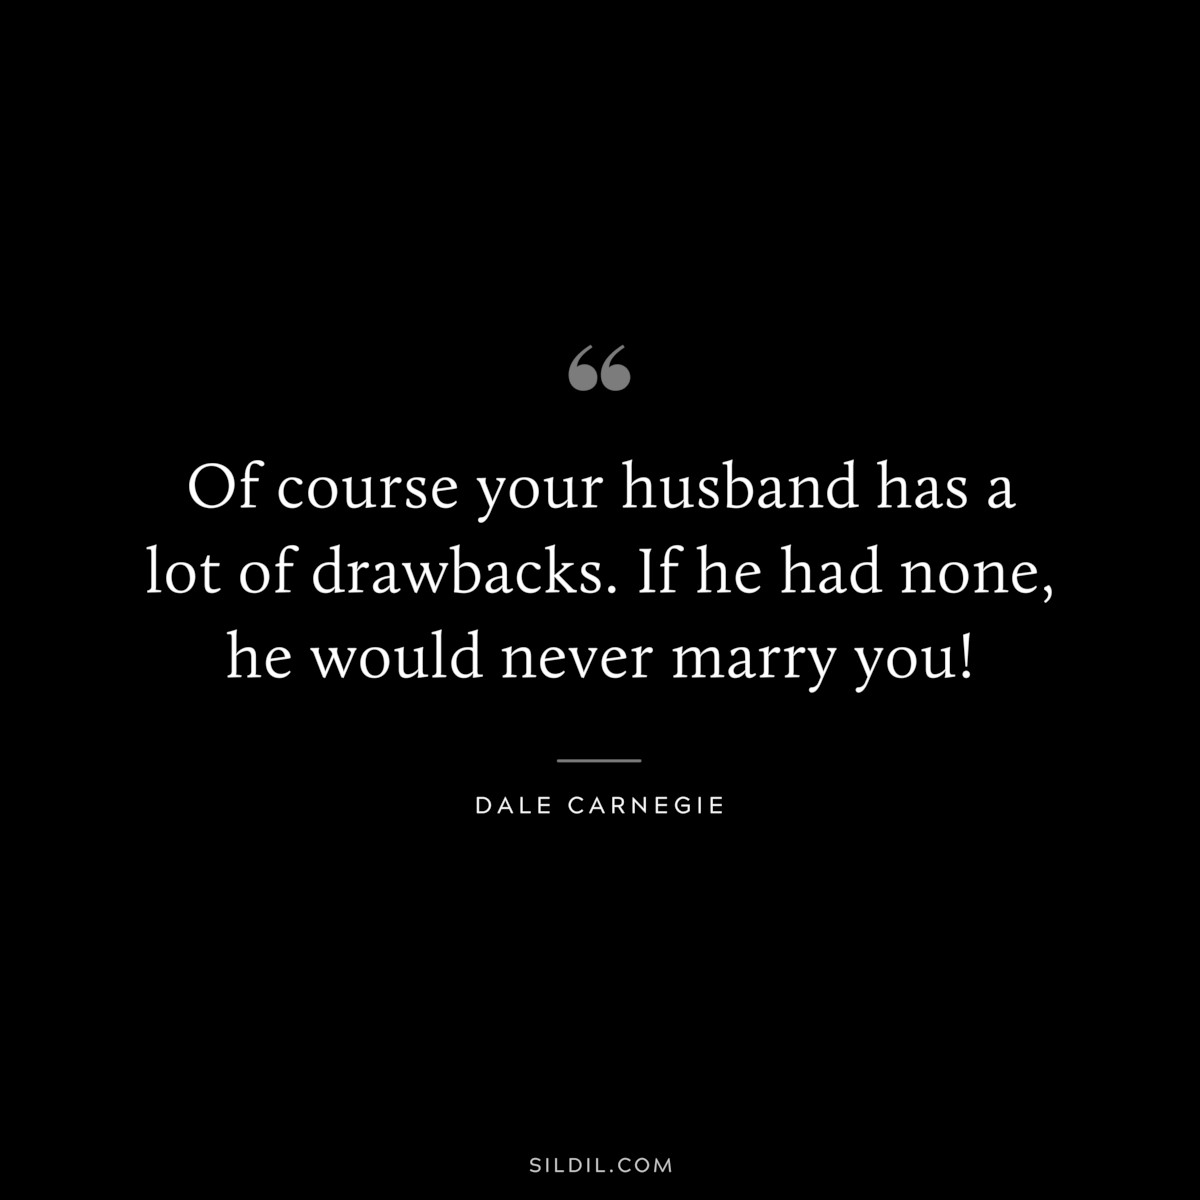 Of course your husband has a lot of drawbacks. If he had none, he would never marry you!― Dale Carnegie